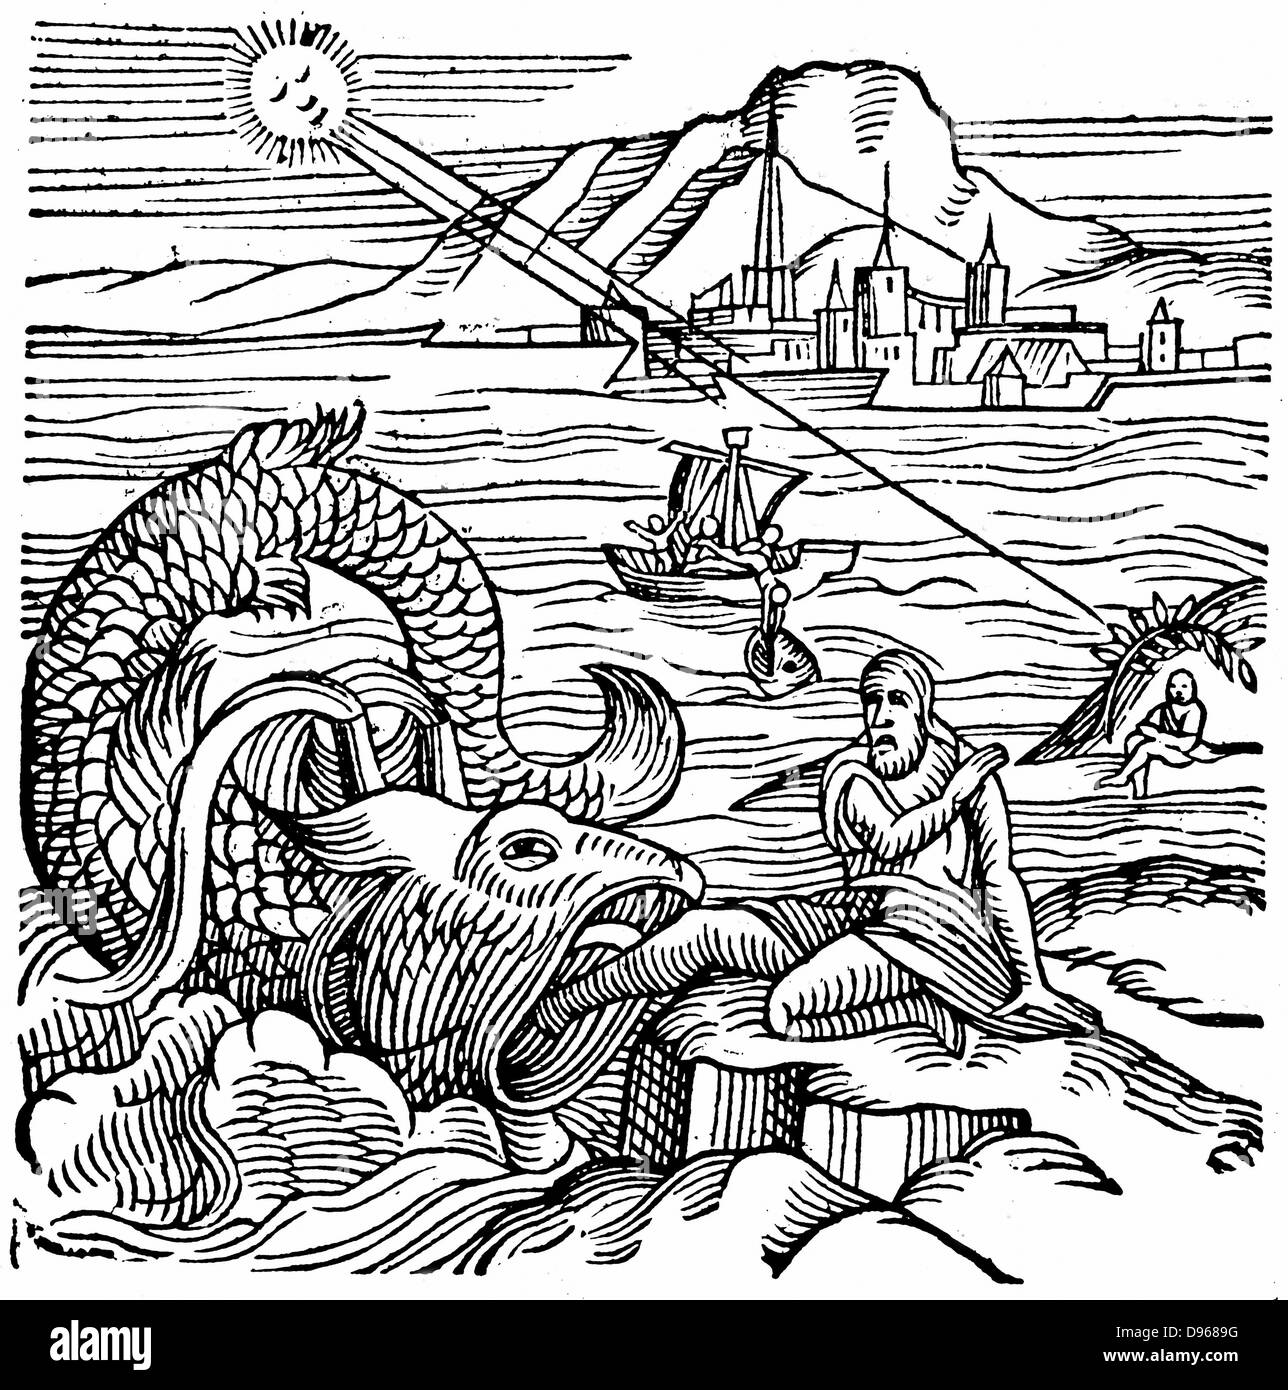 Jonah being spewed up by the whale. In middle of picture he is shown falling overboard and being swallowed. From Conrad Lycosthenes 'Prodigiorum ac ostentorum chronicon' Basel 1557. Woodcut. Stock Photo